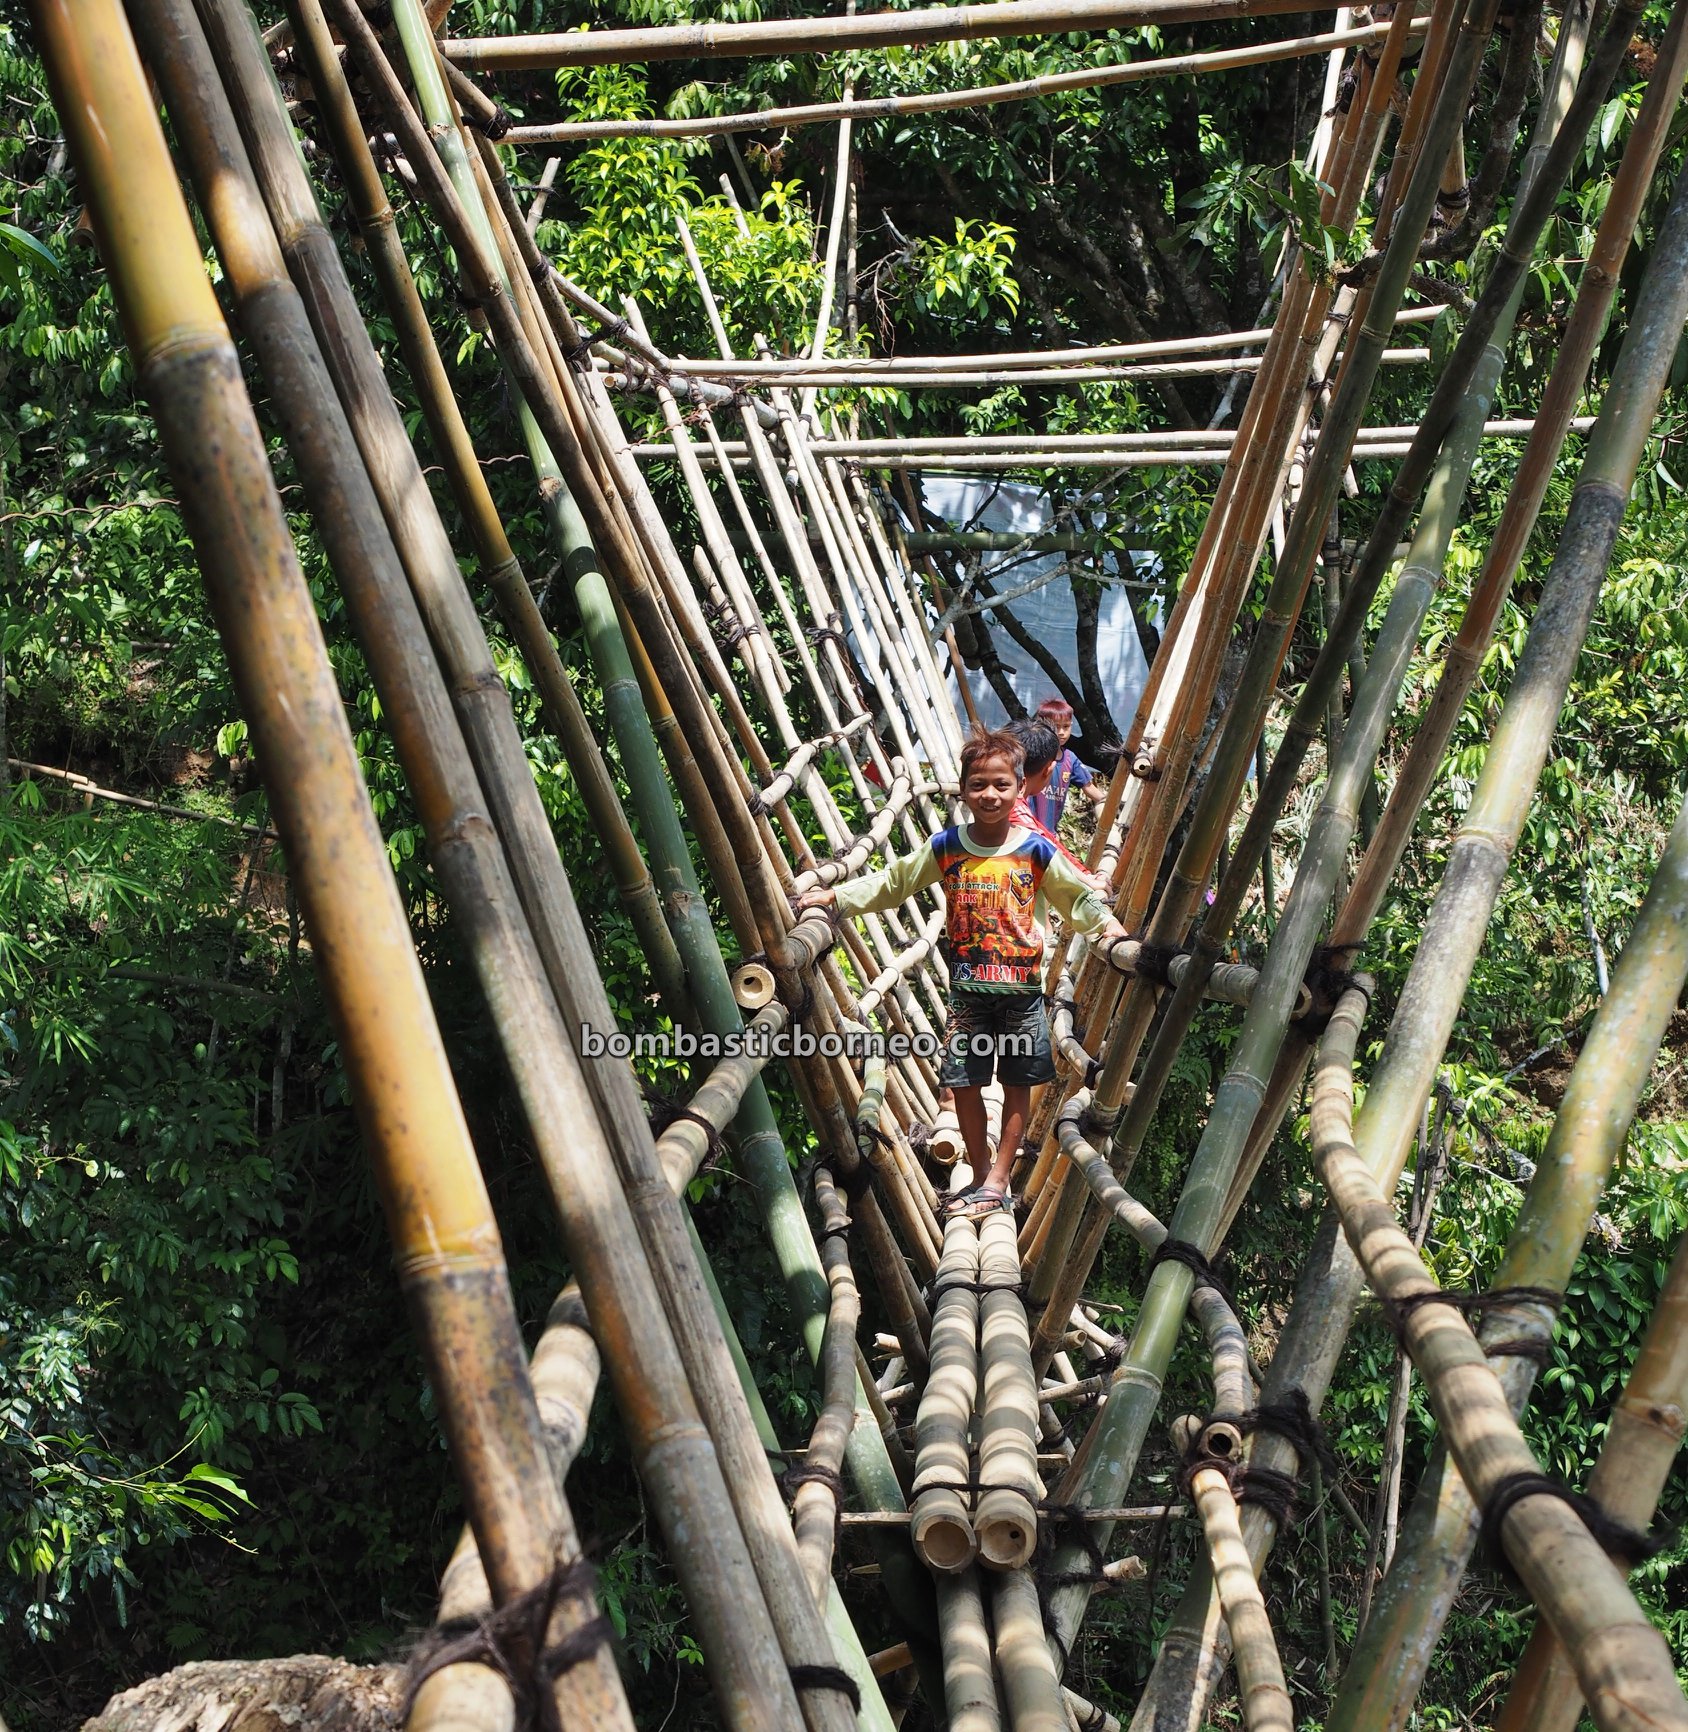 bamboo bridge, Sungkung Medeng, authentic, traditional, backpackers, Bengkayang, Indonesia, Kalimantan Barat, native, tribal, highland, village, tourist attraction, Travel guide, Trans Borneo